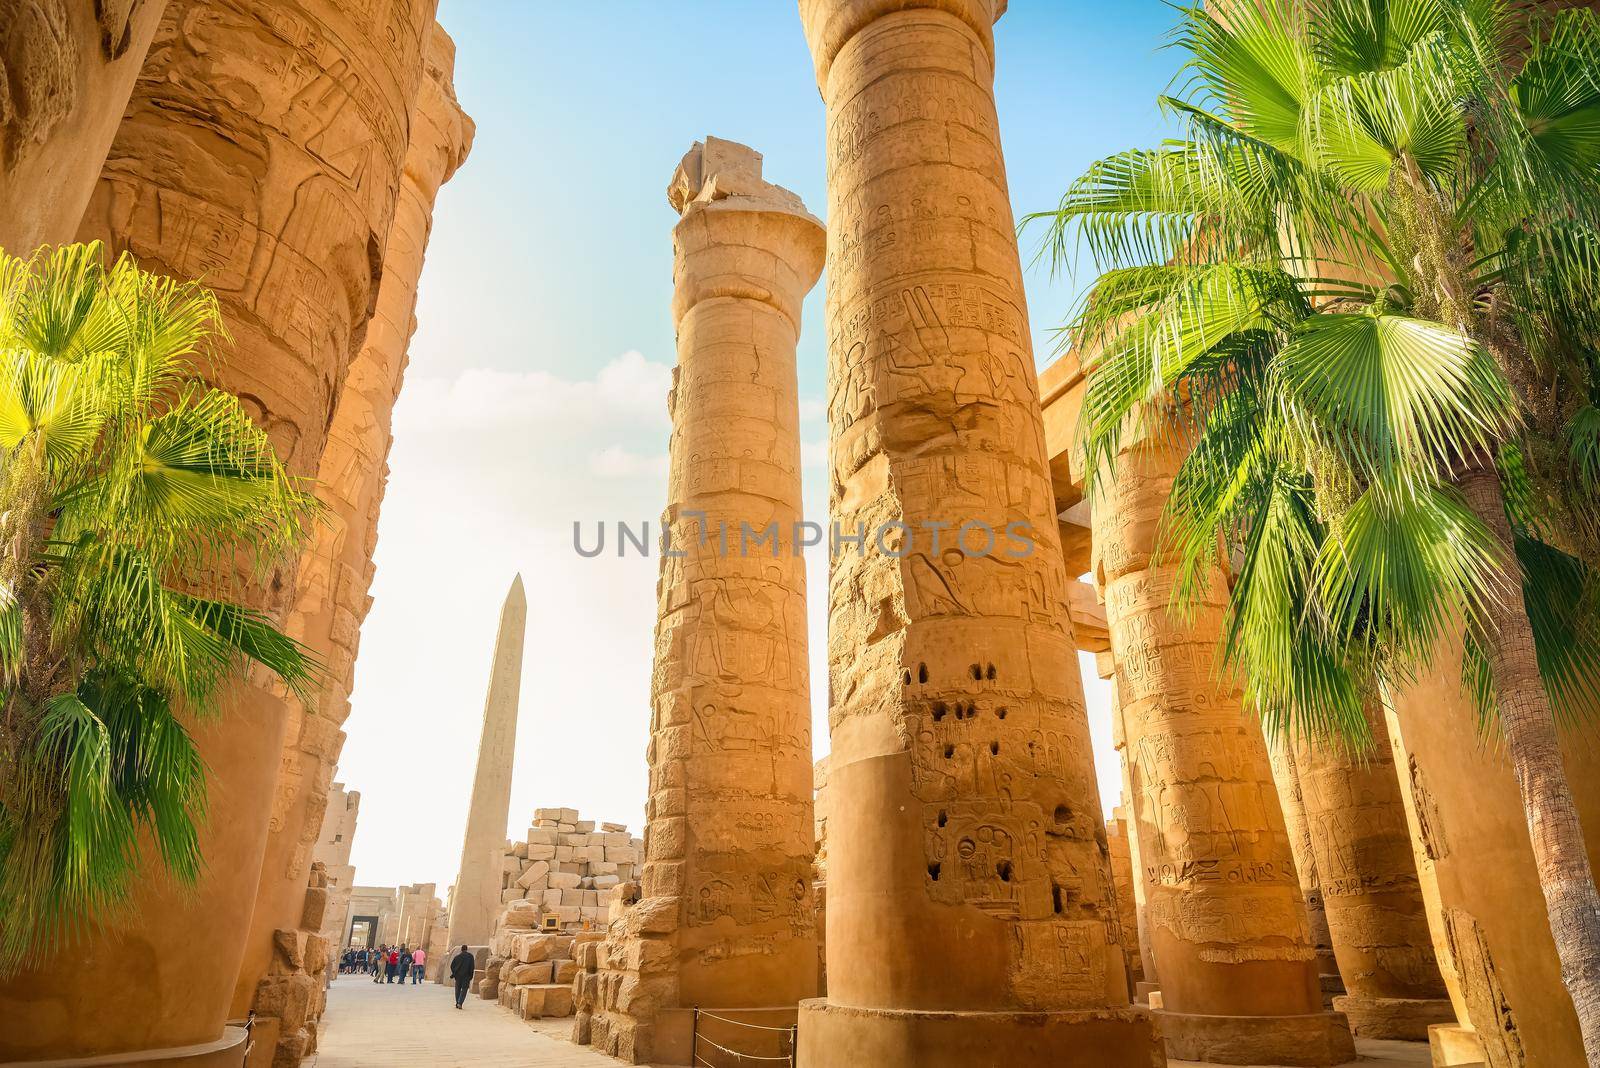 Great columns in Karnak temple by Givaga